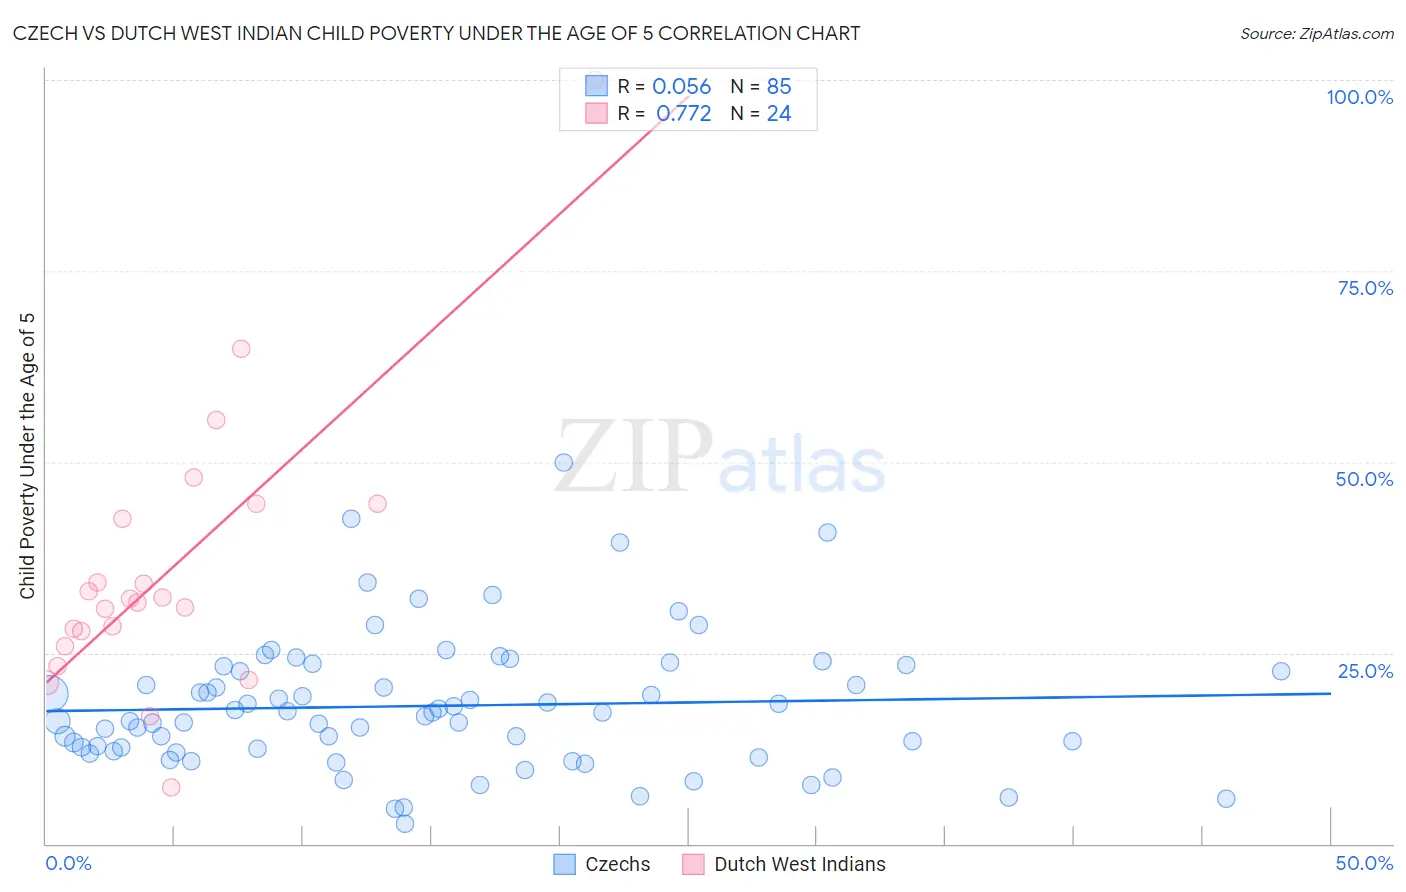 Czech vs Dutch West Indian Child Poverty Under the Age of 5